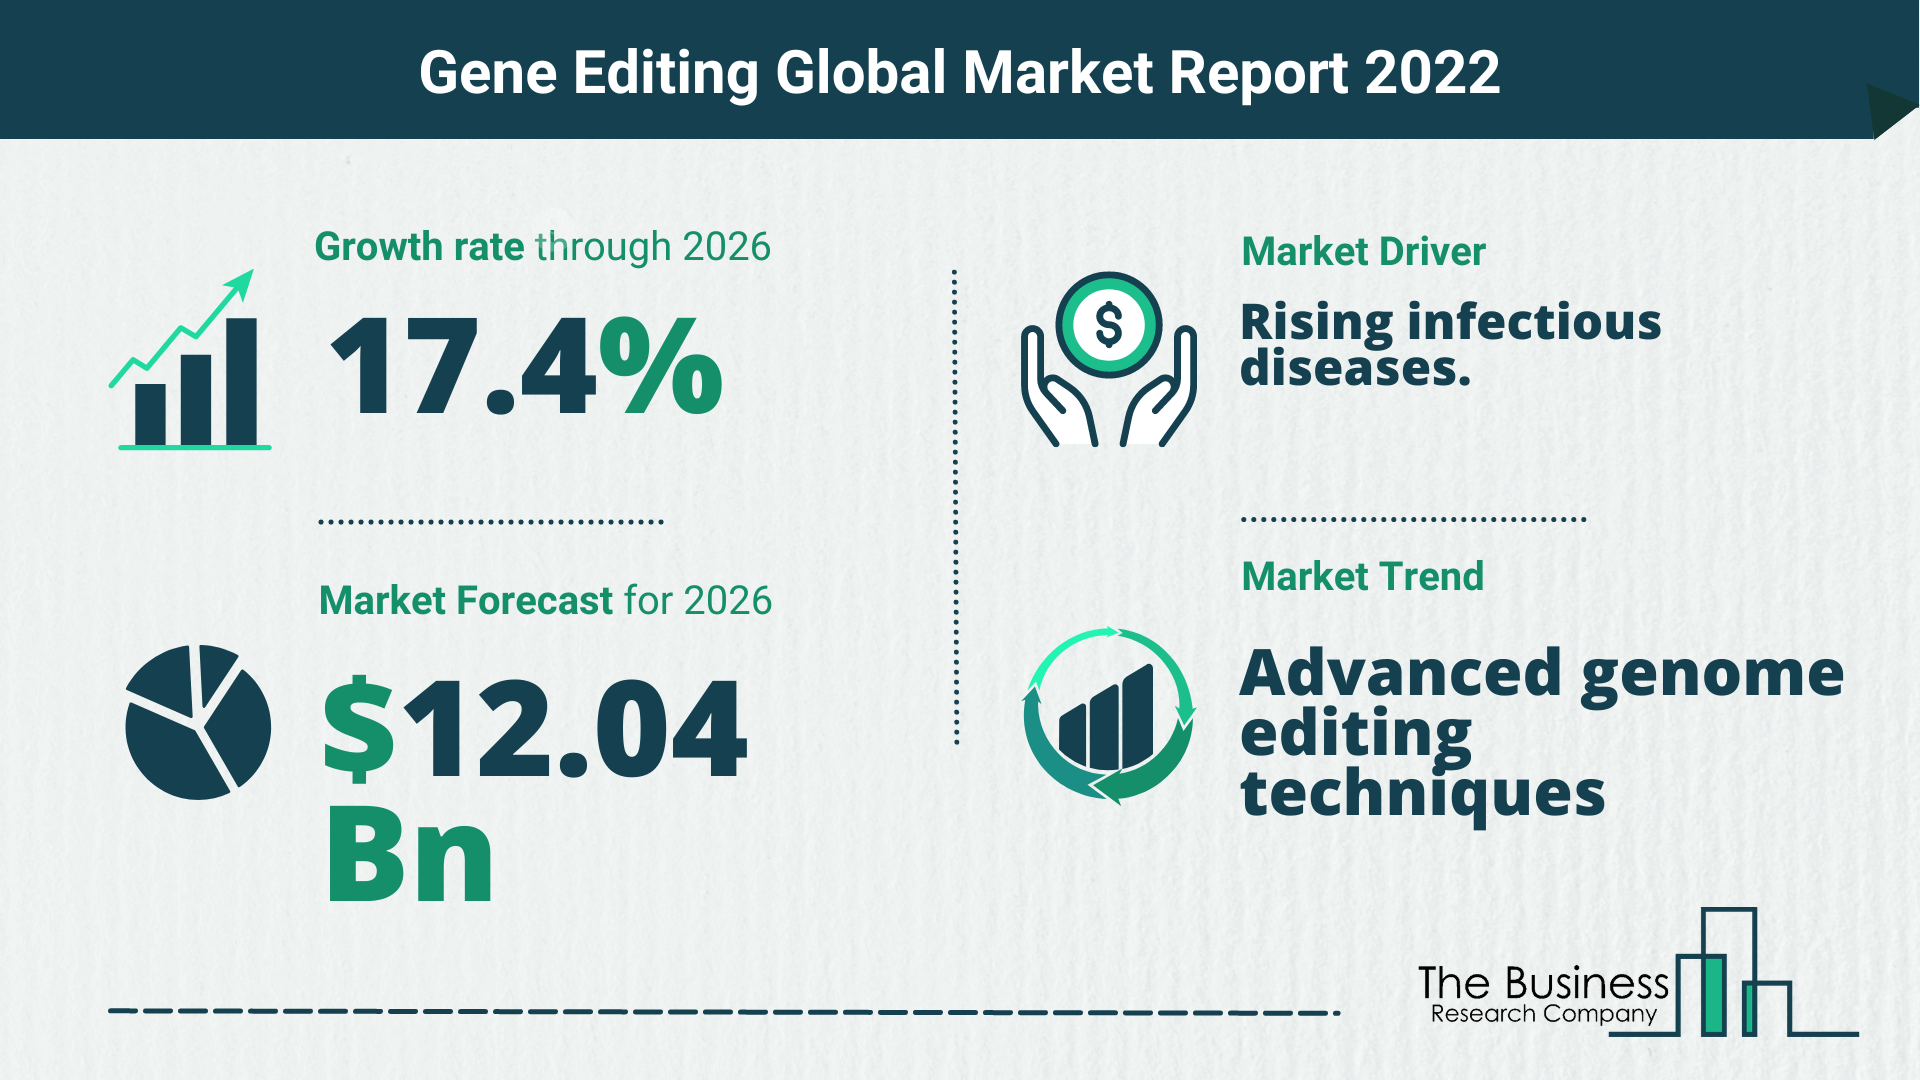 Latest Gene Editing Market Growth Study 2022-2026 By The Business Research Company